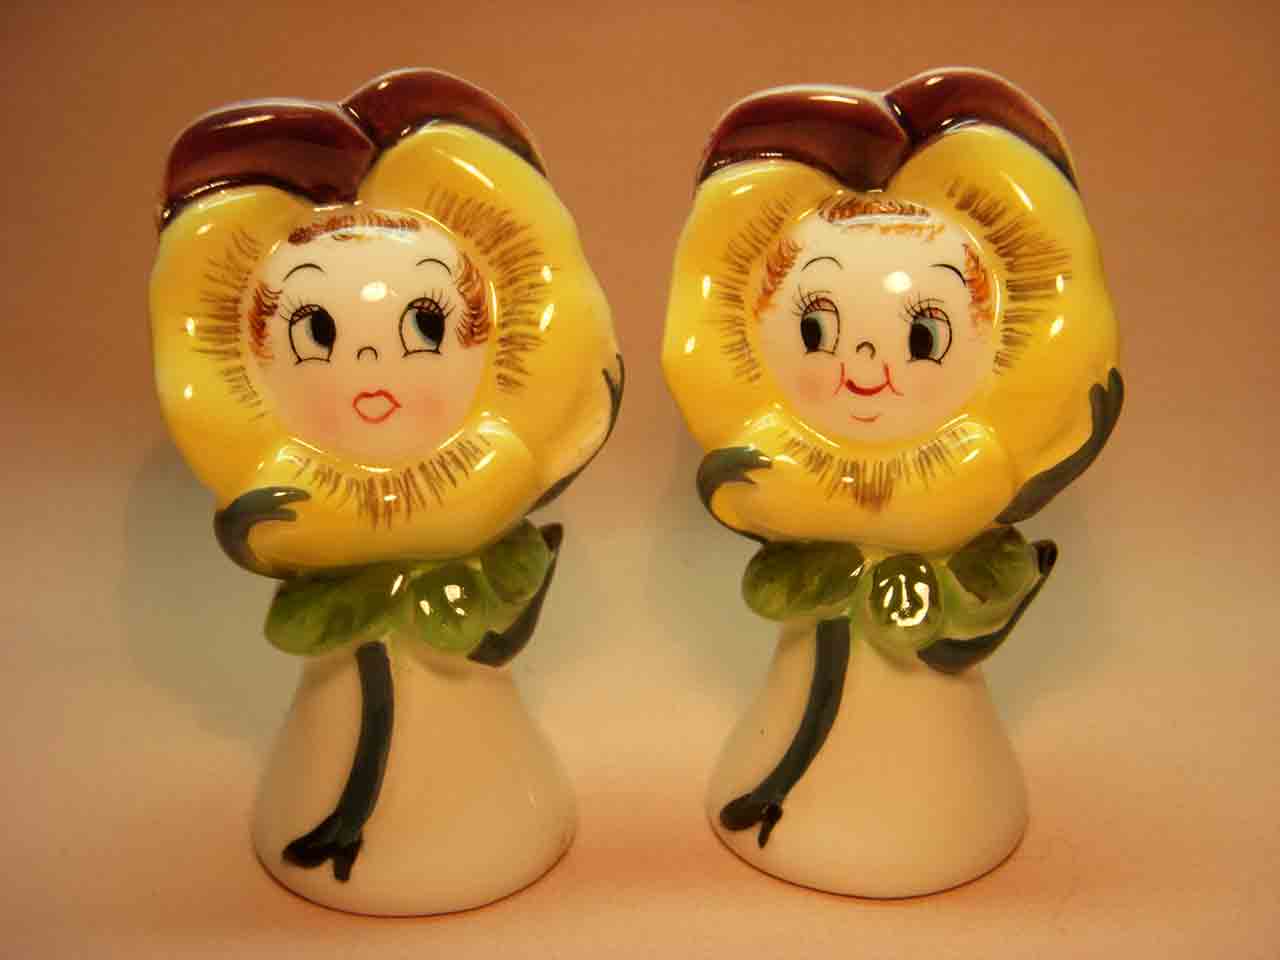 Stick Figures PY poppies flowers anthropomorphic salt and pepper shakers